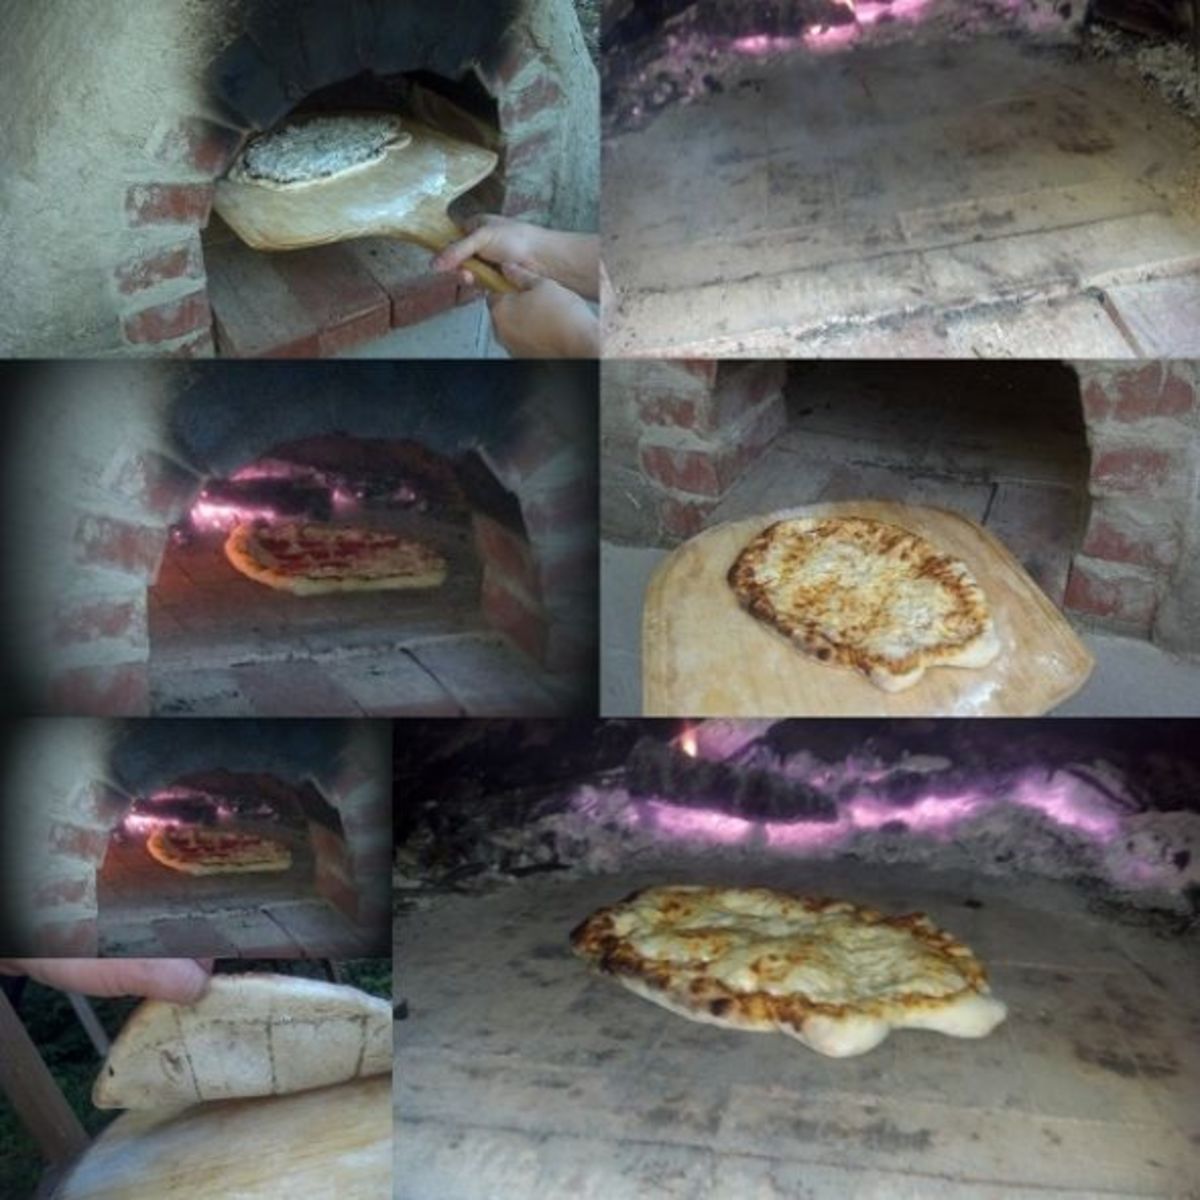 Continue the drying fires, and of course make a pizza!